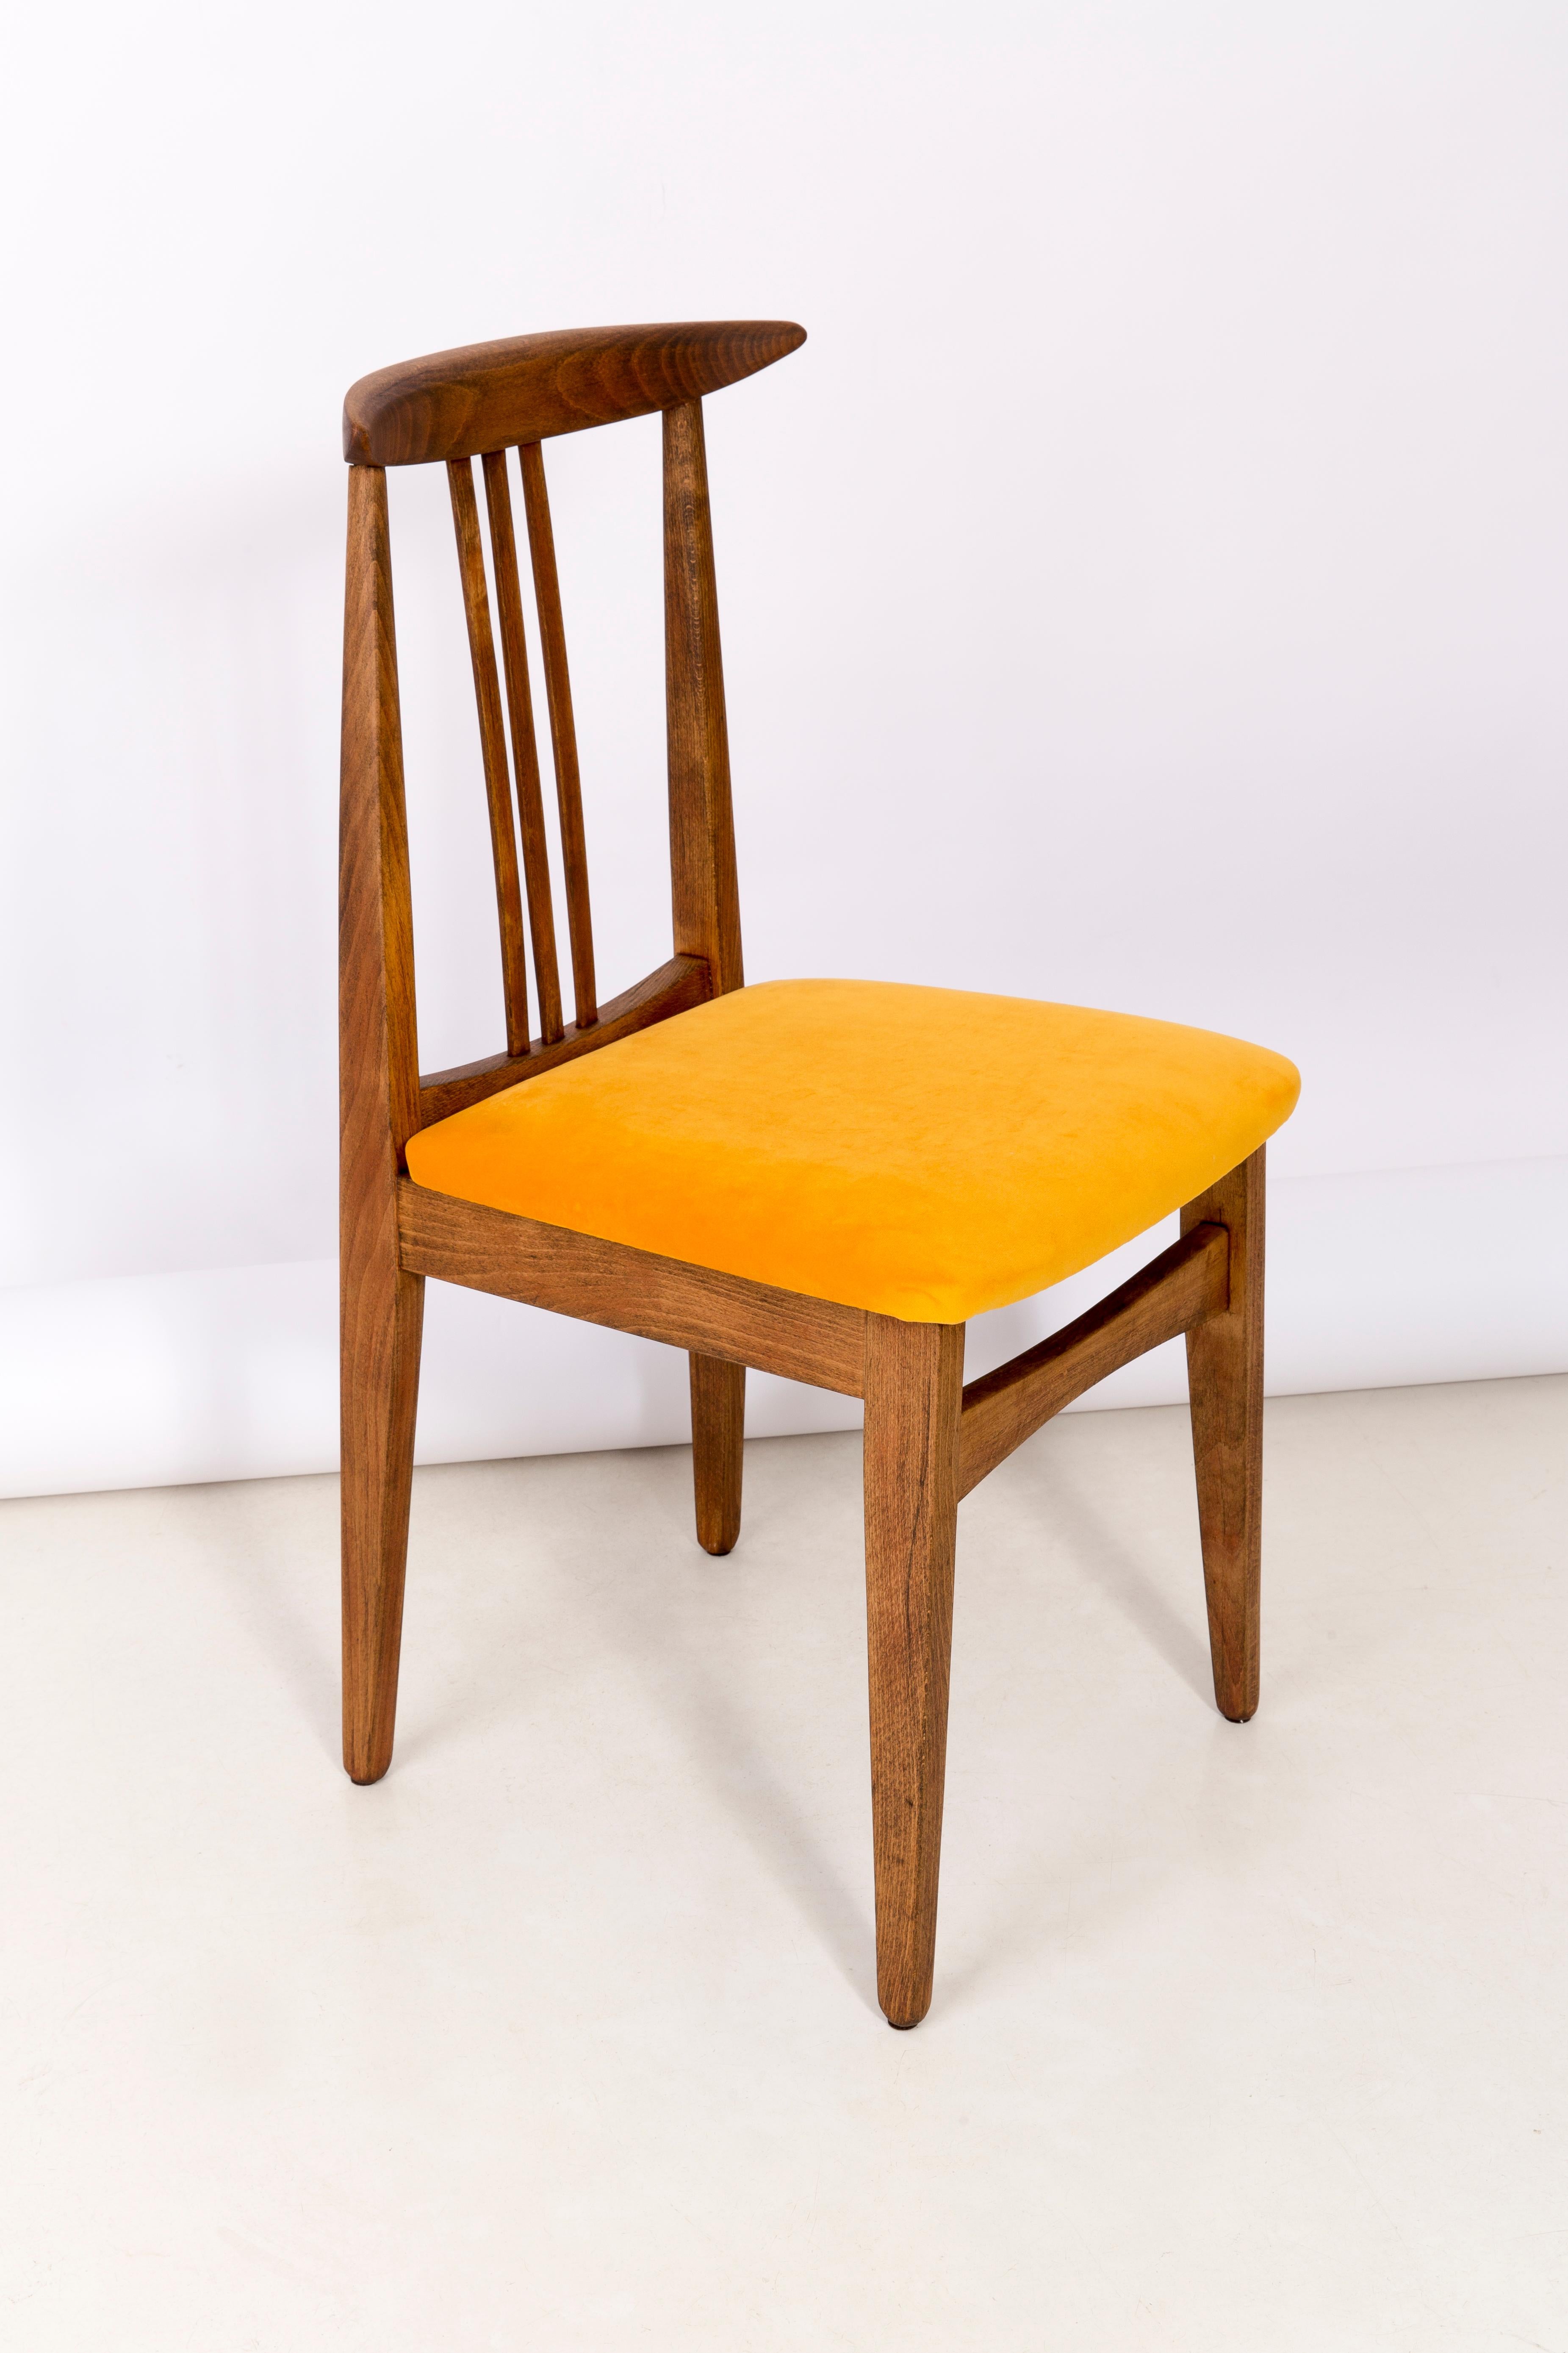 Velvet Set of Eight Yellow Chairs, by Zielinski, Europe, 1960s For Sale